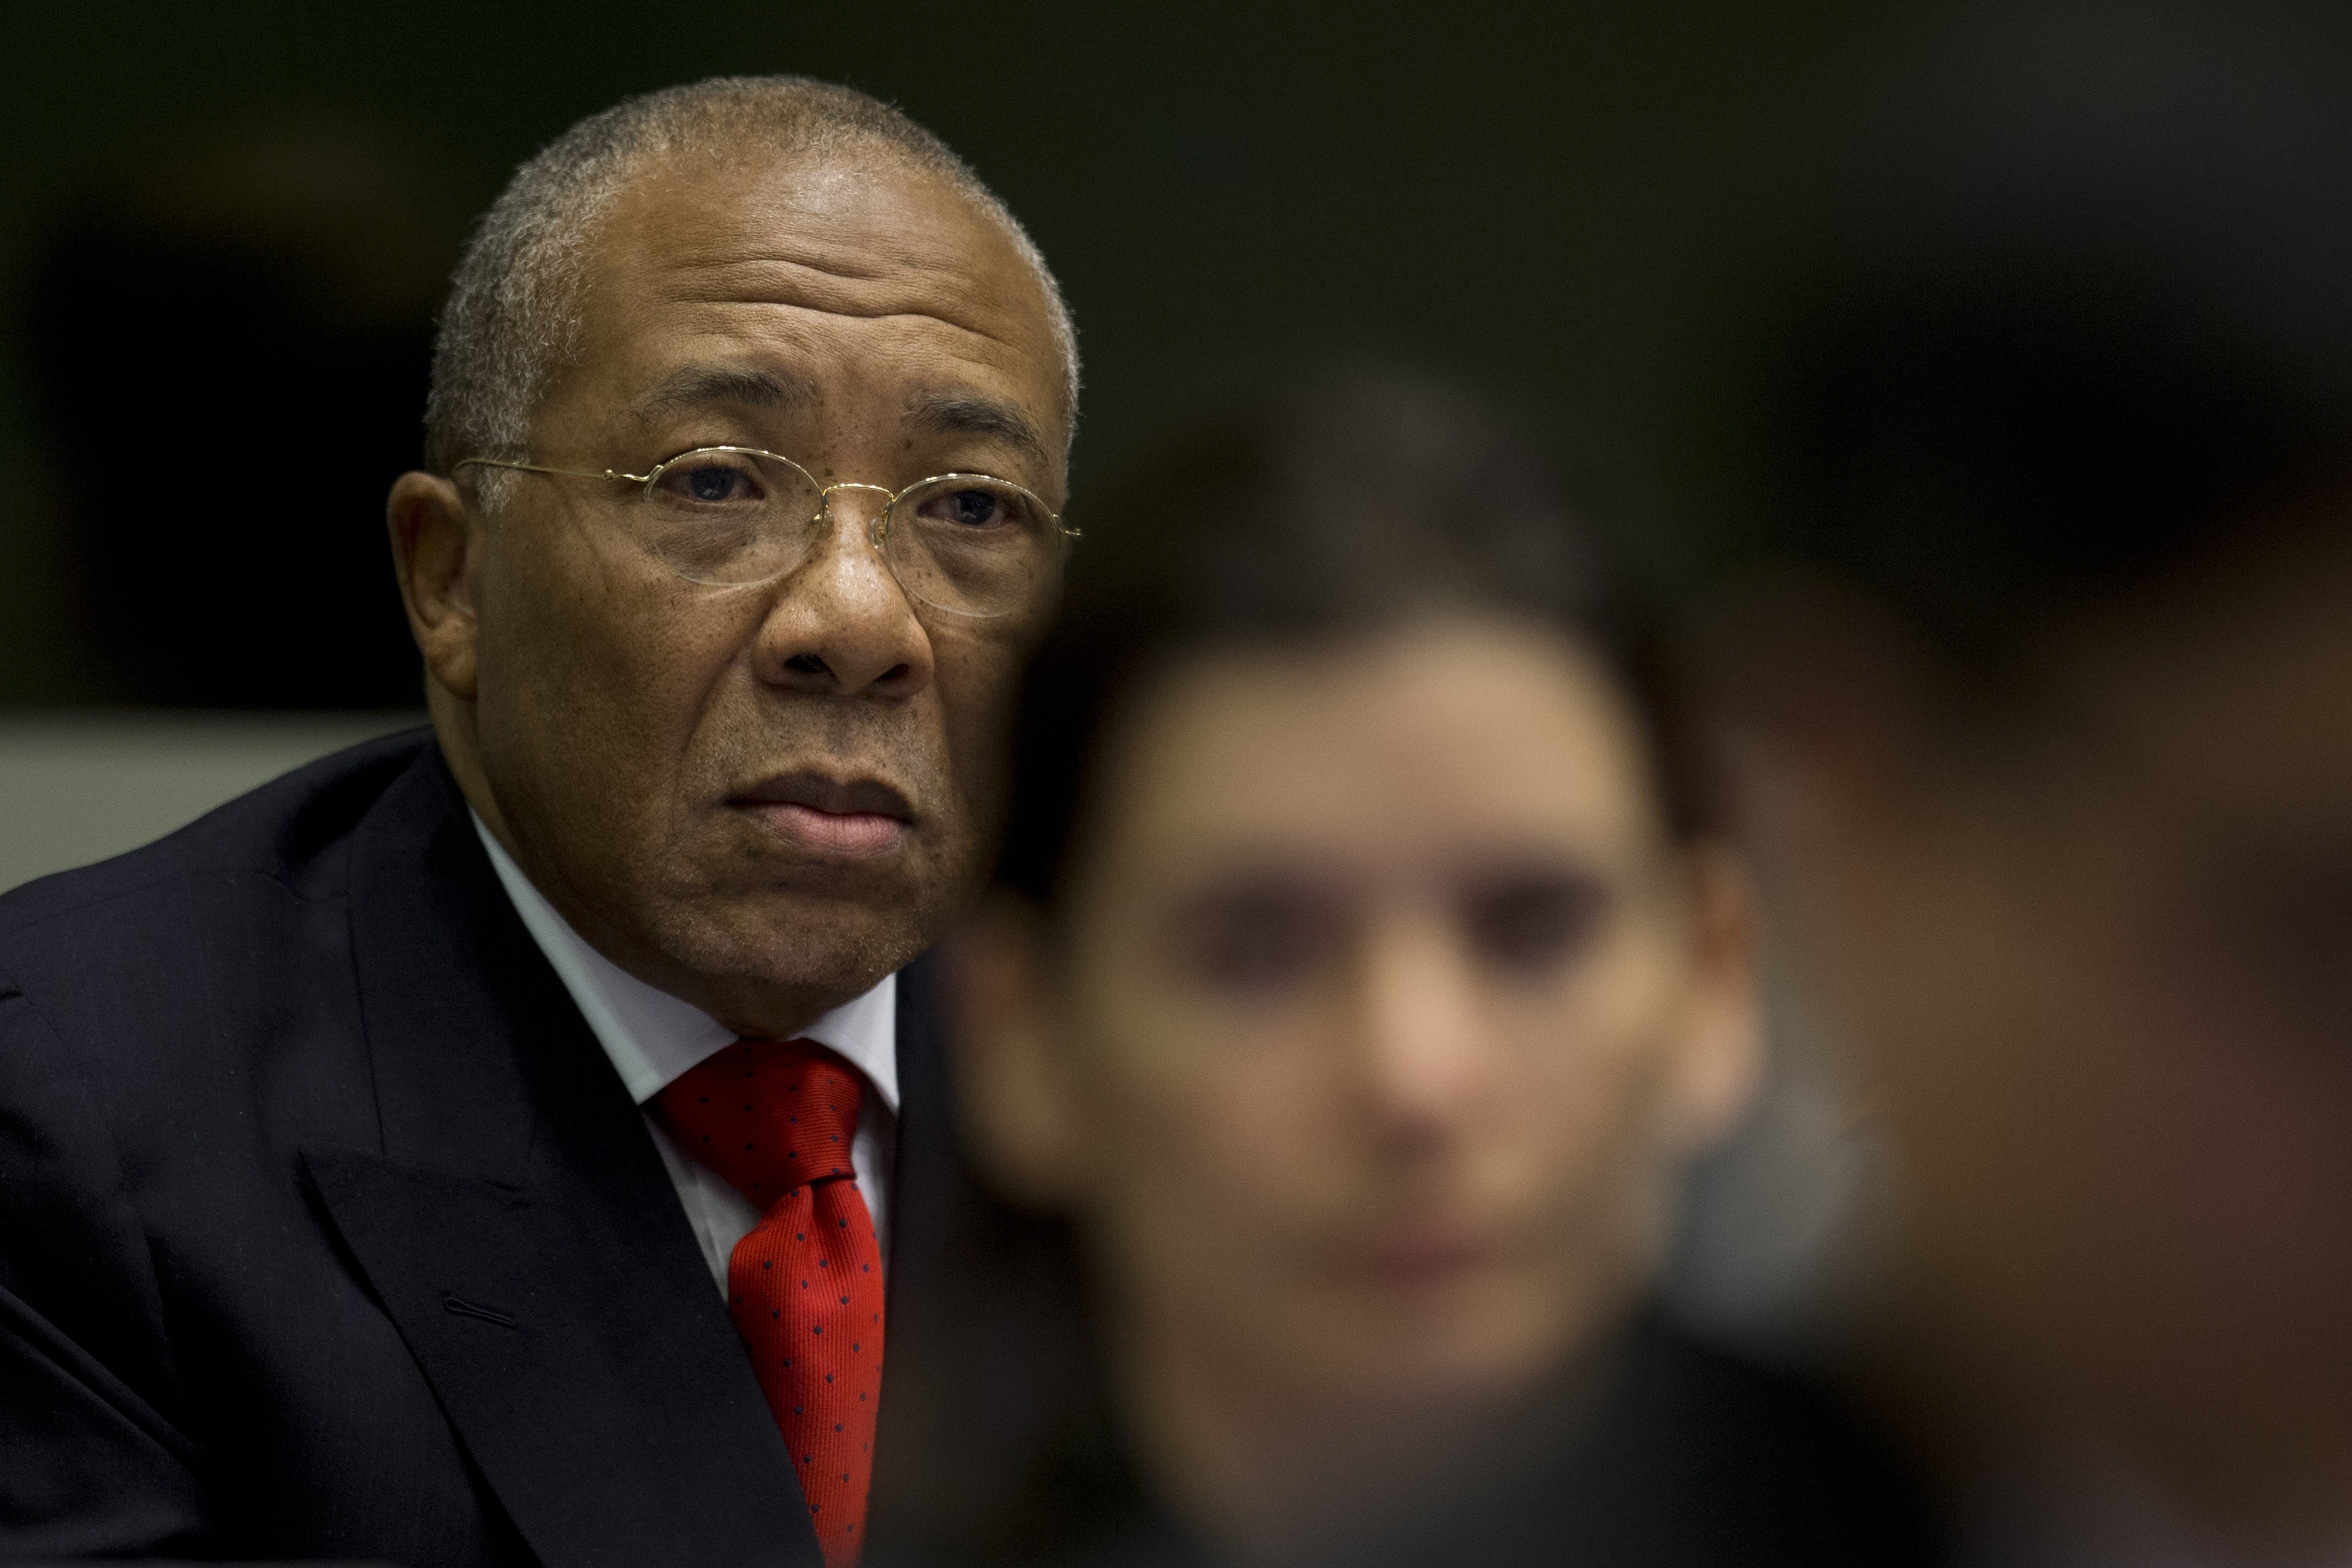 Former Liberian president Charles Taylor was convicted of war crimes in 2012